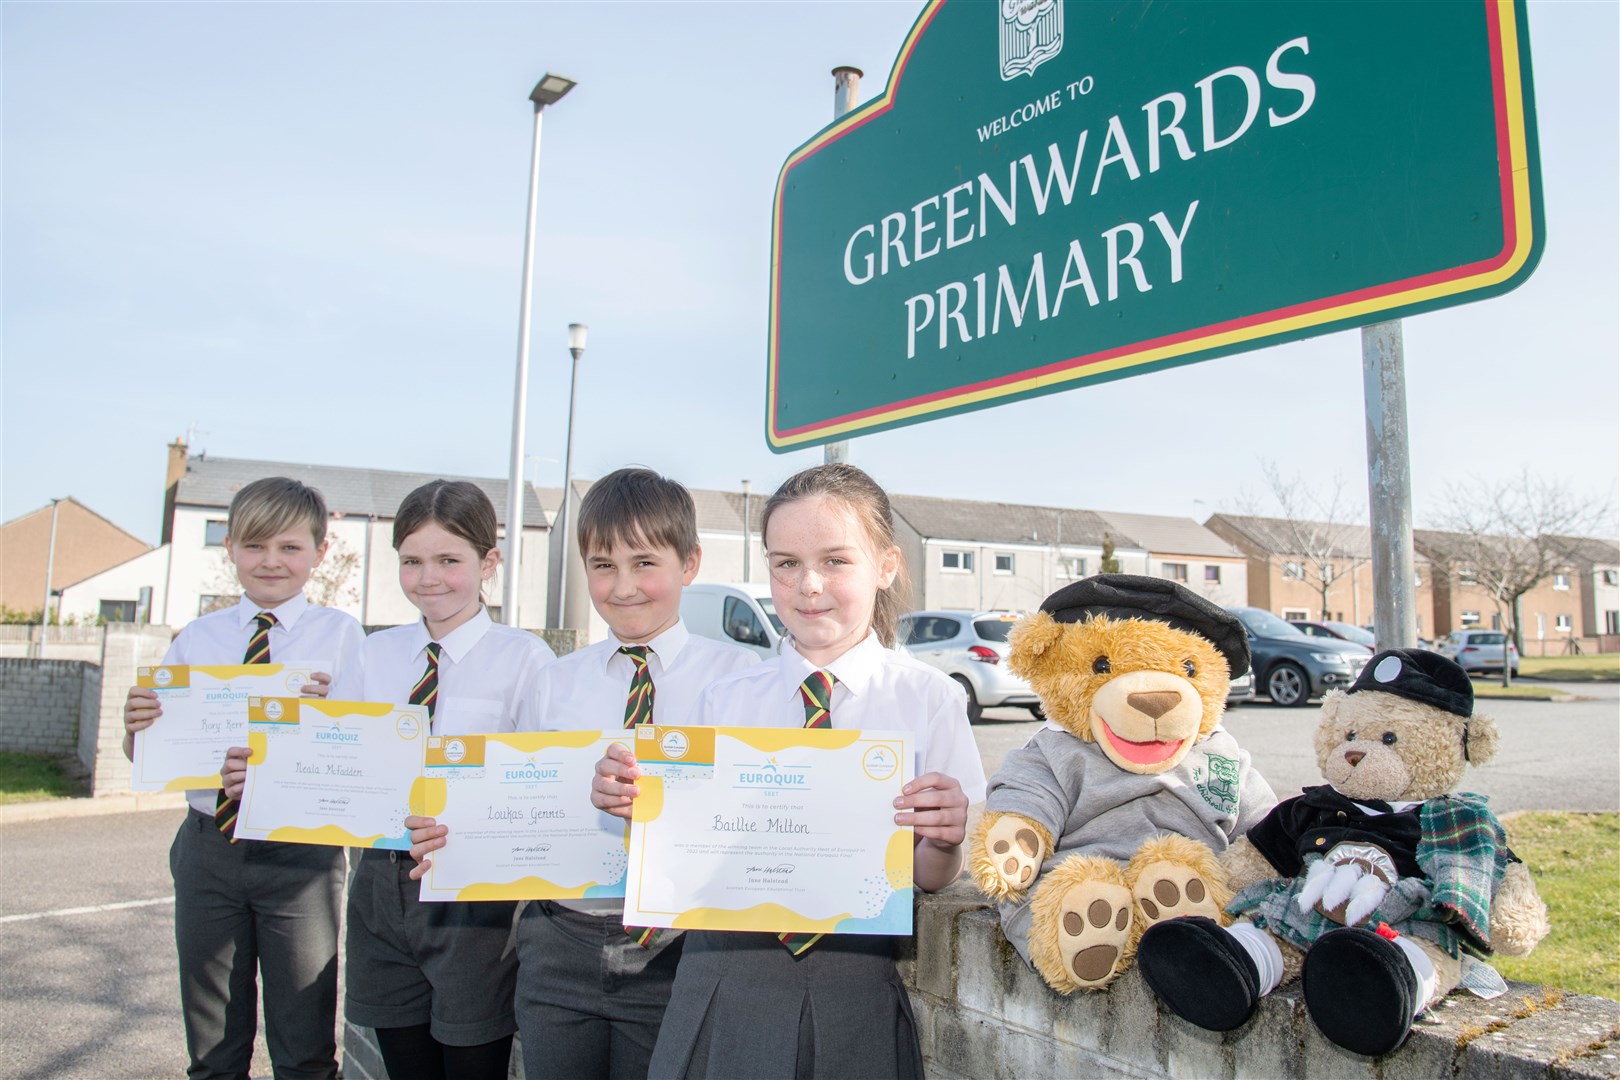 Rory Kerr, Neala McFadden, Loukas Gennis and Baillie Milton...Greenwards Primary School winners of the Euroquiz. ..Picture: Daniel Forsyth..